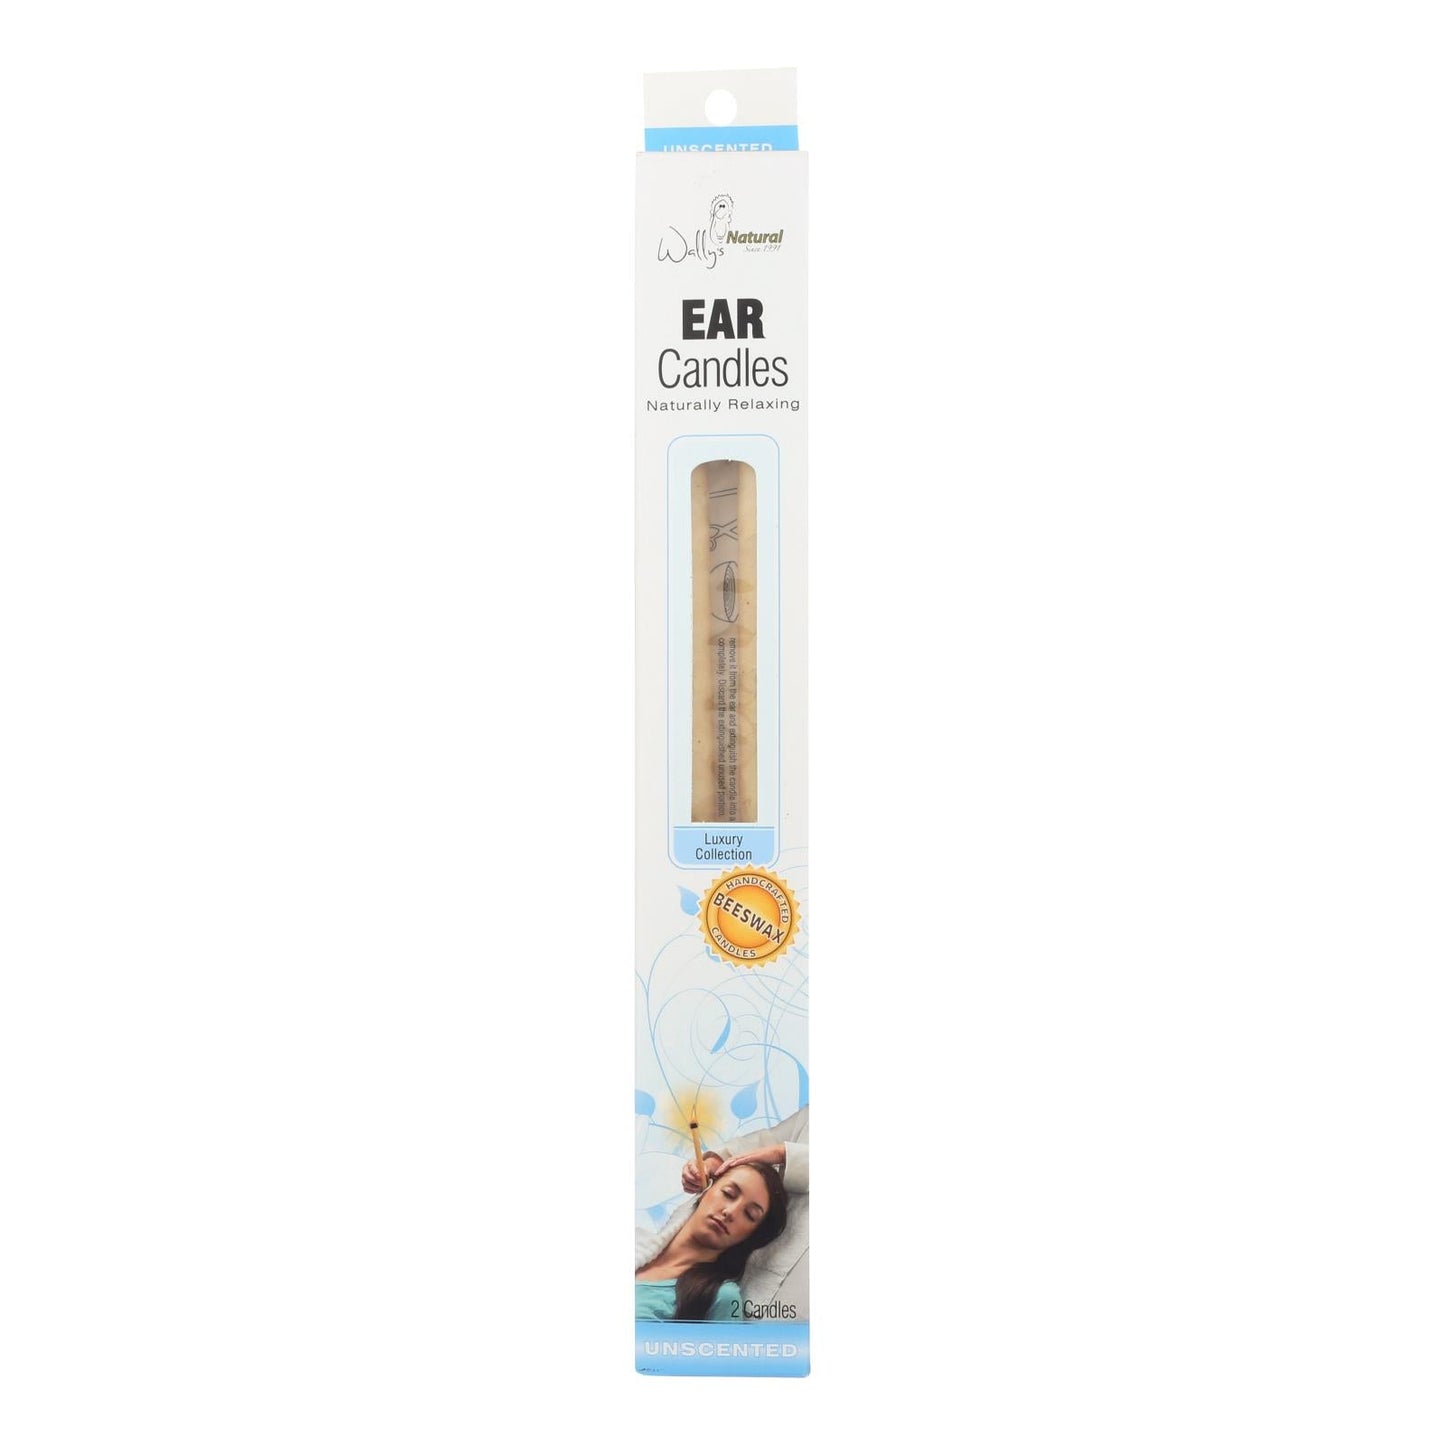 Buy Wally's Beeswax Ear Candle - 2 Candles  at OnlyNaturals.us